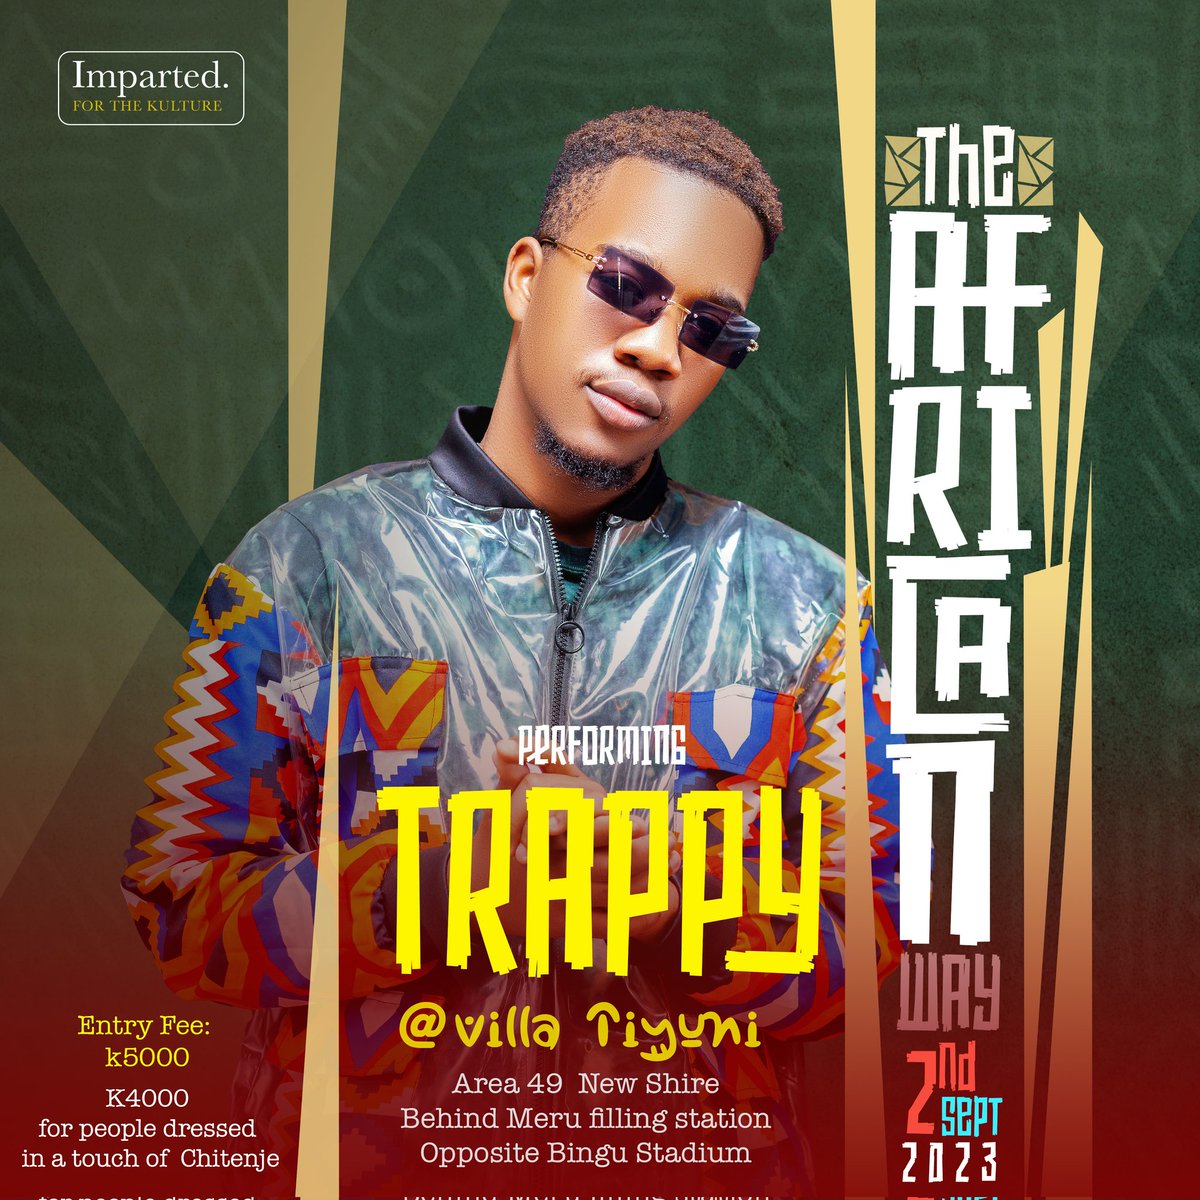 Introducing 'Trappy' one of the acts performing at ' The African Way ' Concert on the 2nd of september 2023. 
Make a plan 'Ndalama' yo isanathe.

#AfroPianoFestival #TheAfricanWay #UnforgettableNight #DJgoxy #VJIce #DJHappy #GrooveToTheBeats #BigBoxMusic #Imparted #MusicalJourney